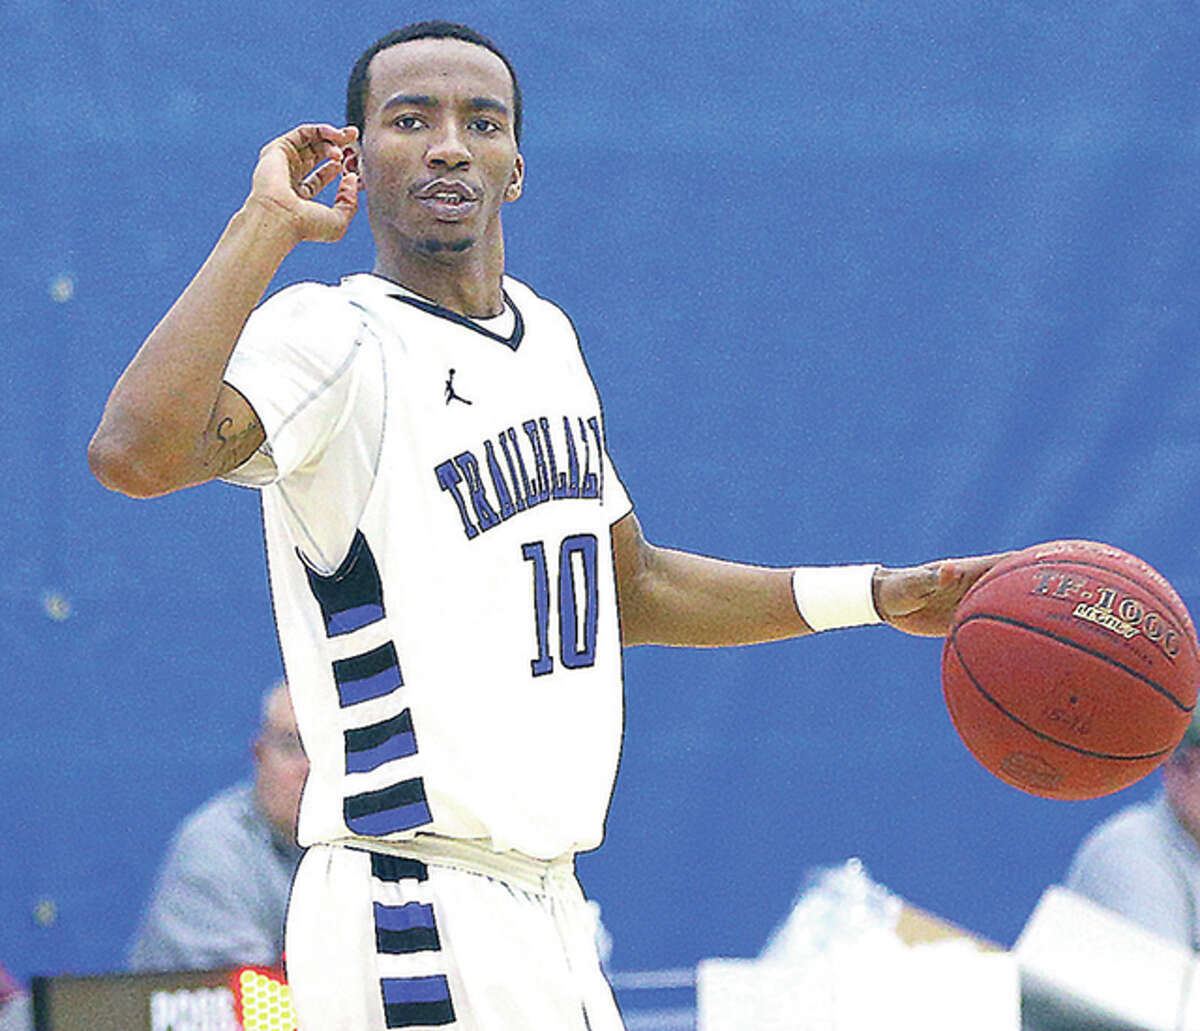 LCCC’s Will Sides scored 28 of his team’s points in Wednesday night’s 121-107 victory over Lake Land Community college at the River Bend Arena.